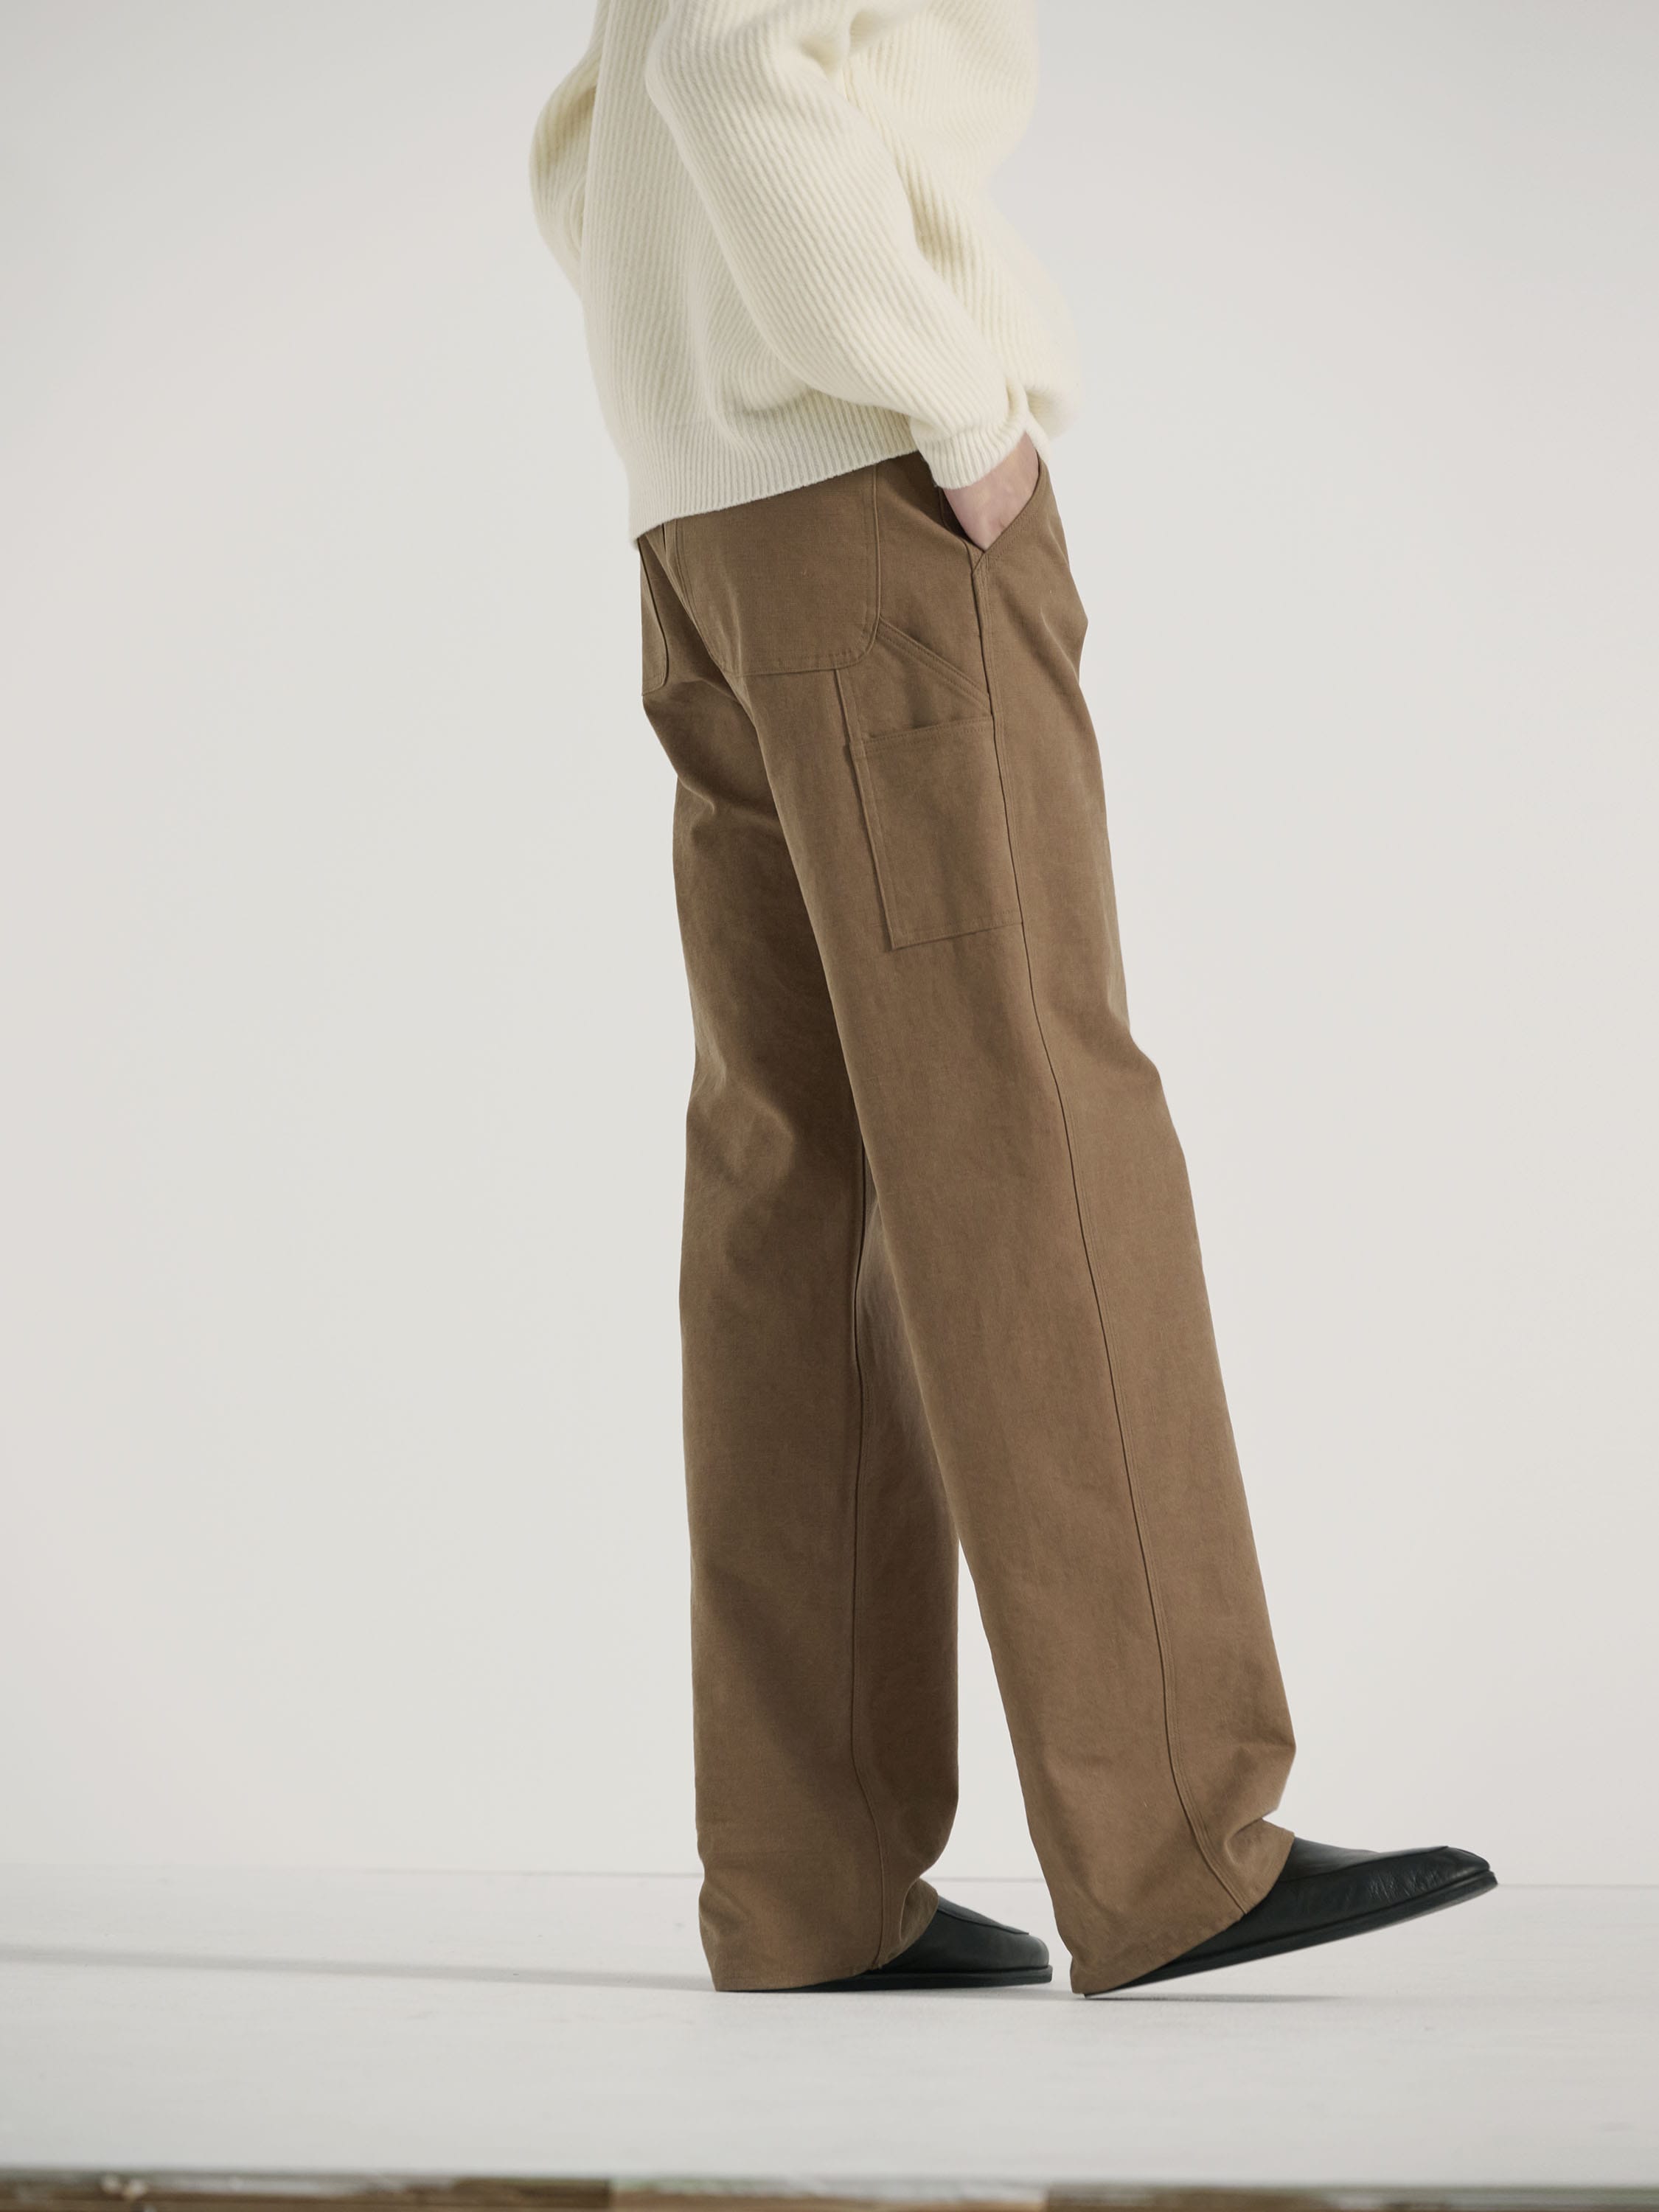 WASHED HEAVY CANVAS PANTS 詳細画像 BROWN 1